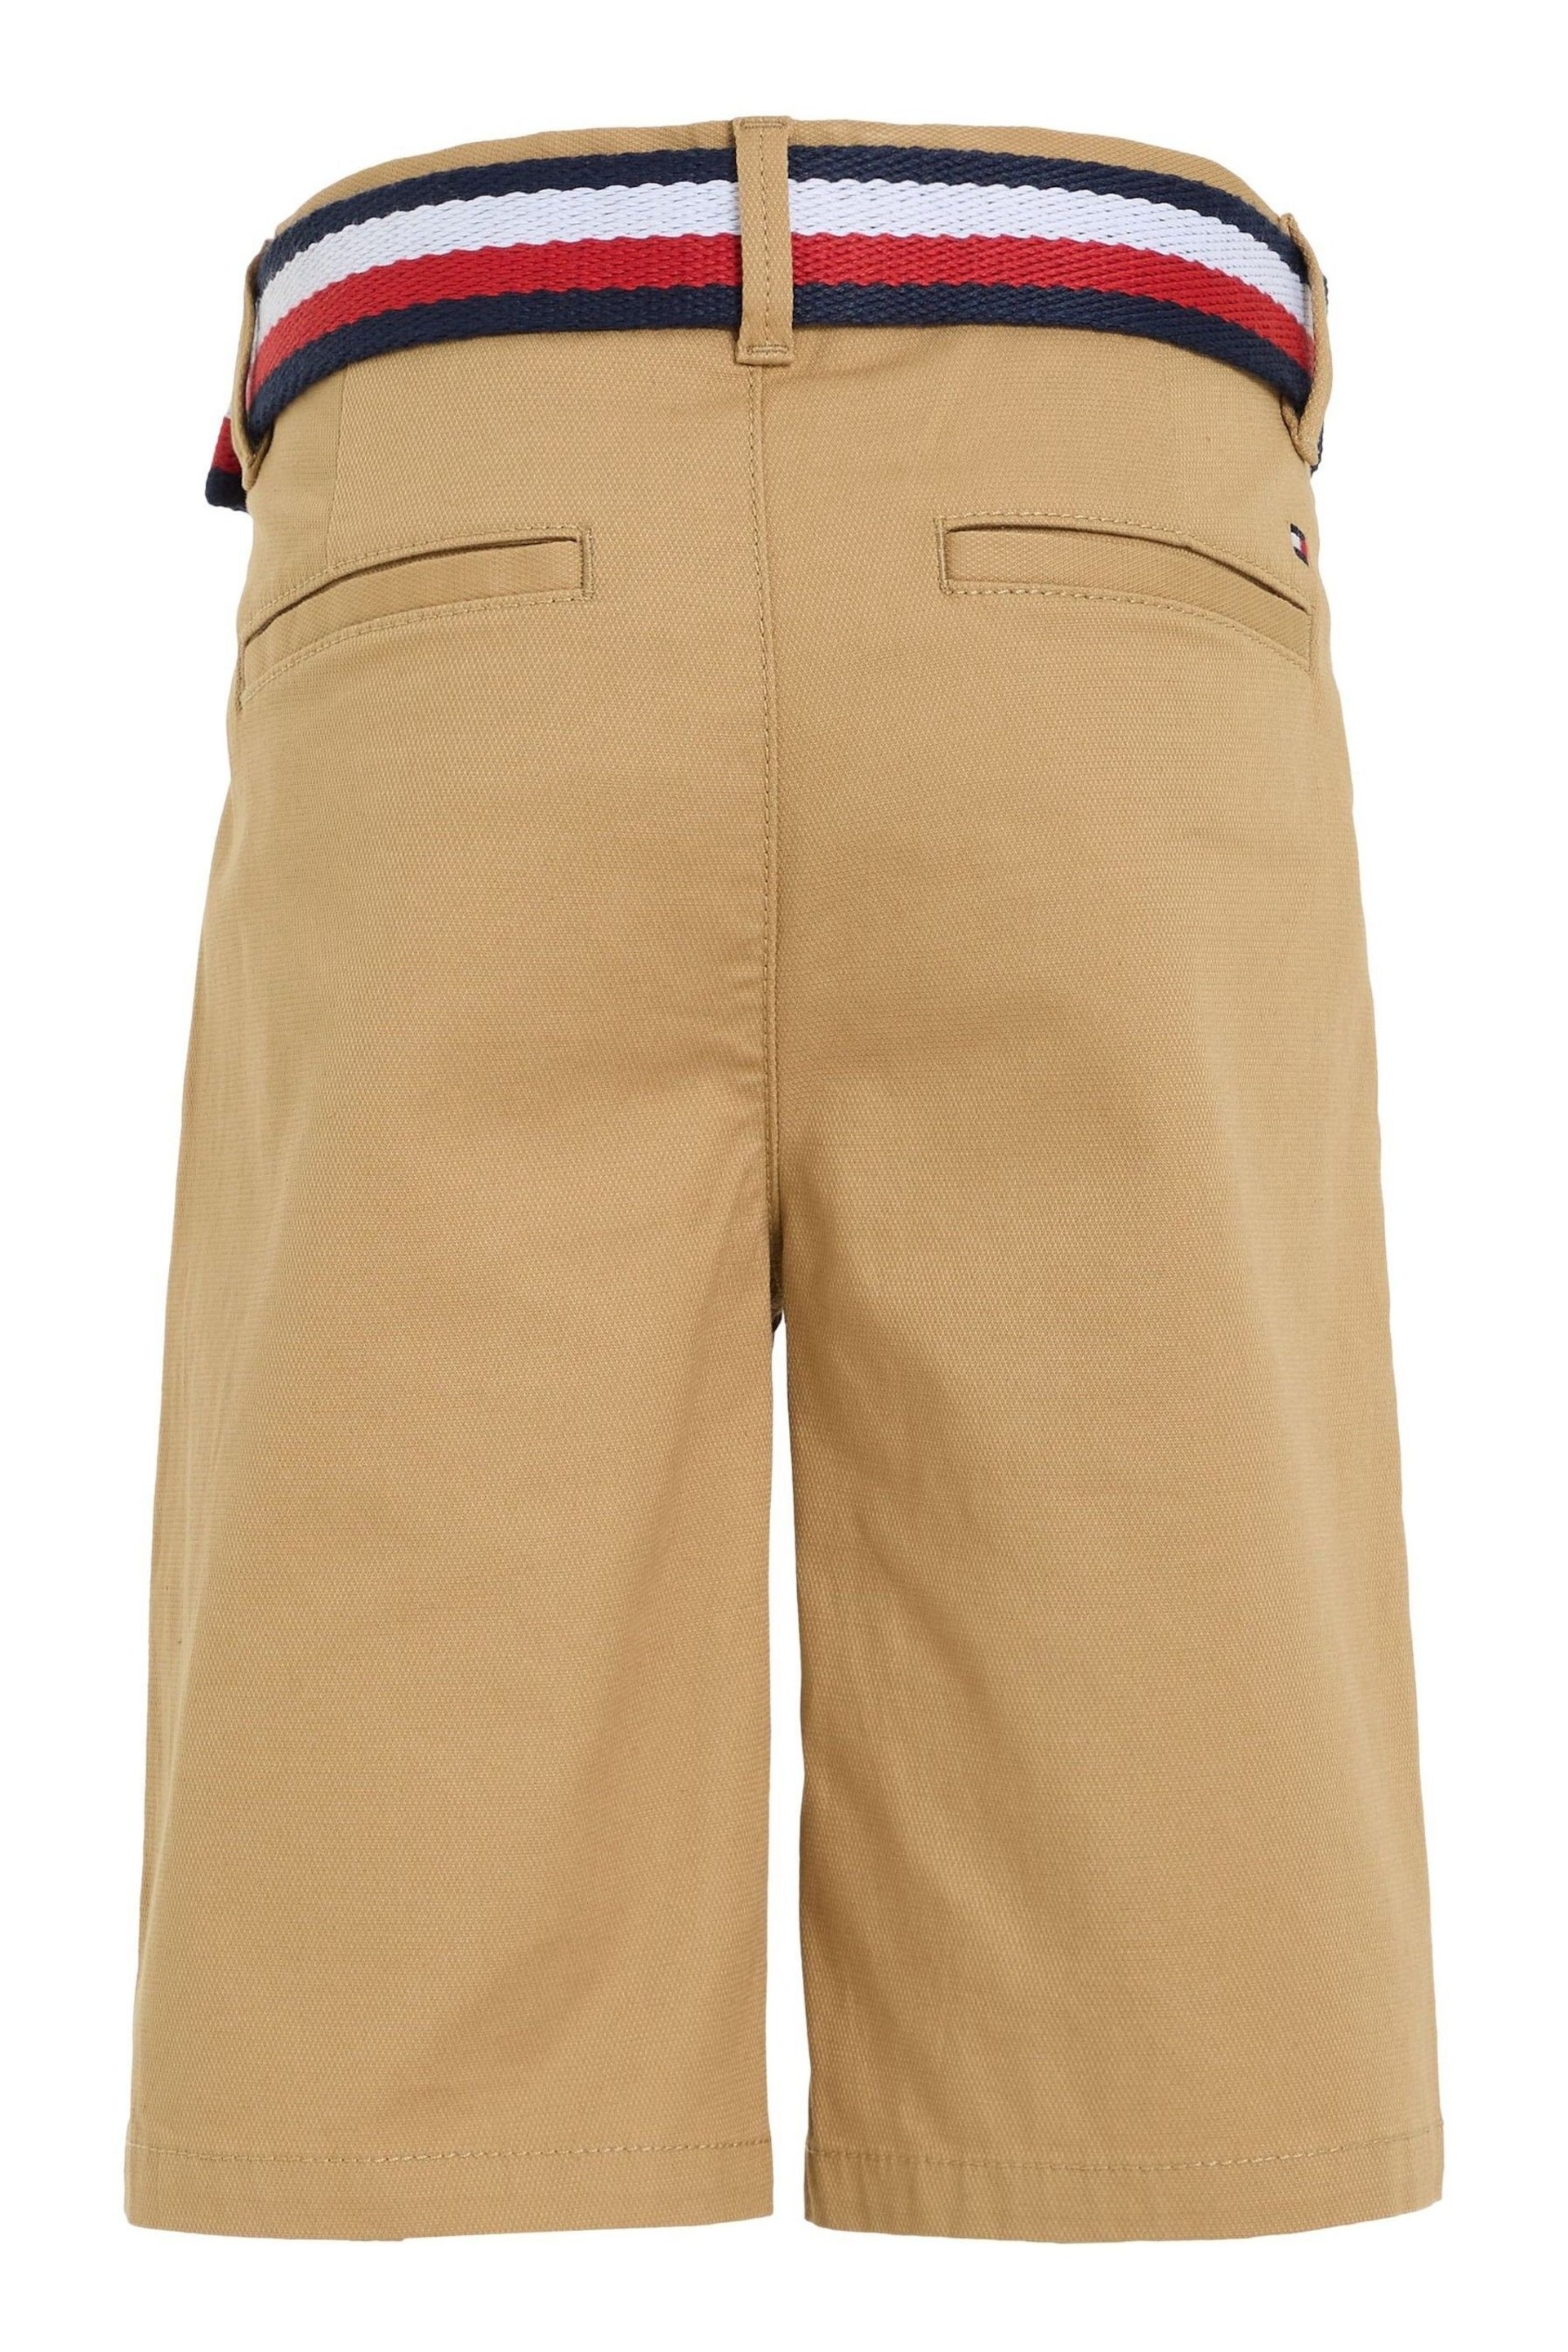 Tommy Hilfiger Woven Belted Shorts - Image 5 of 6